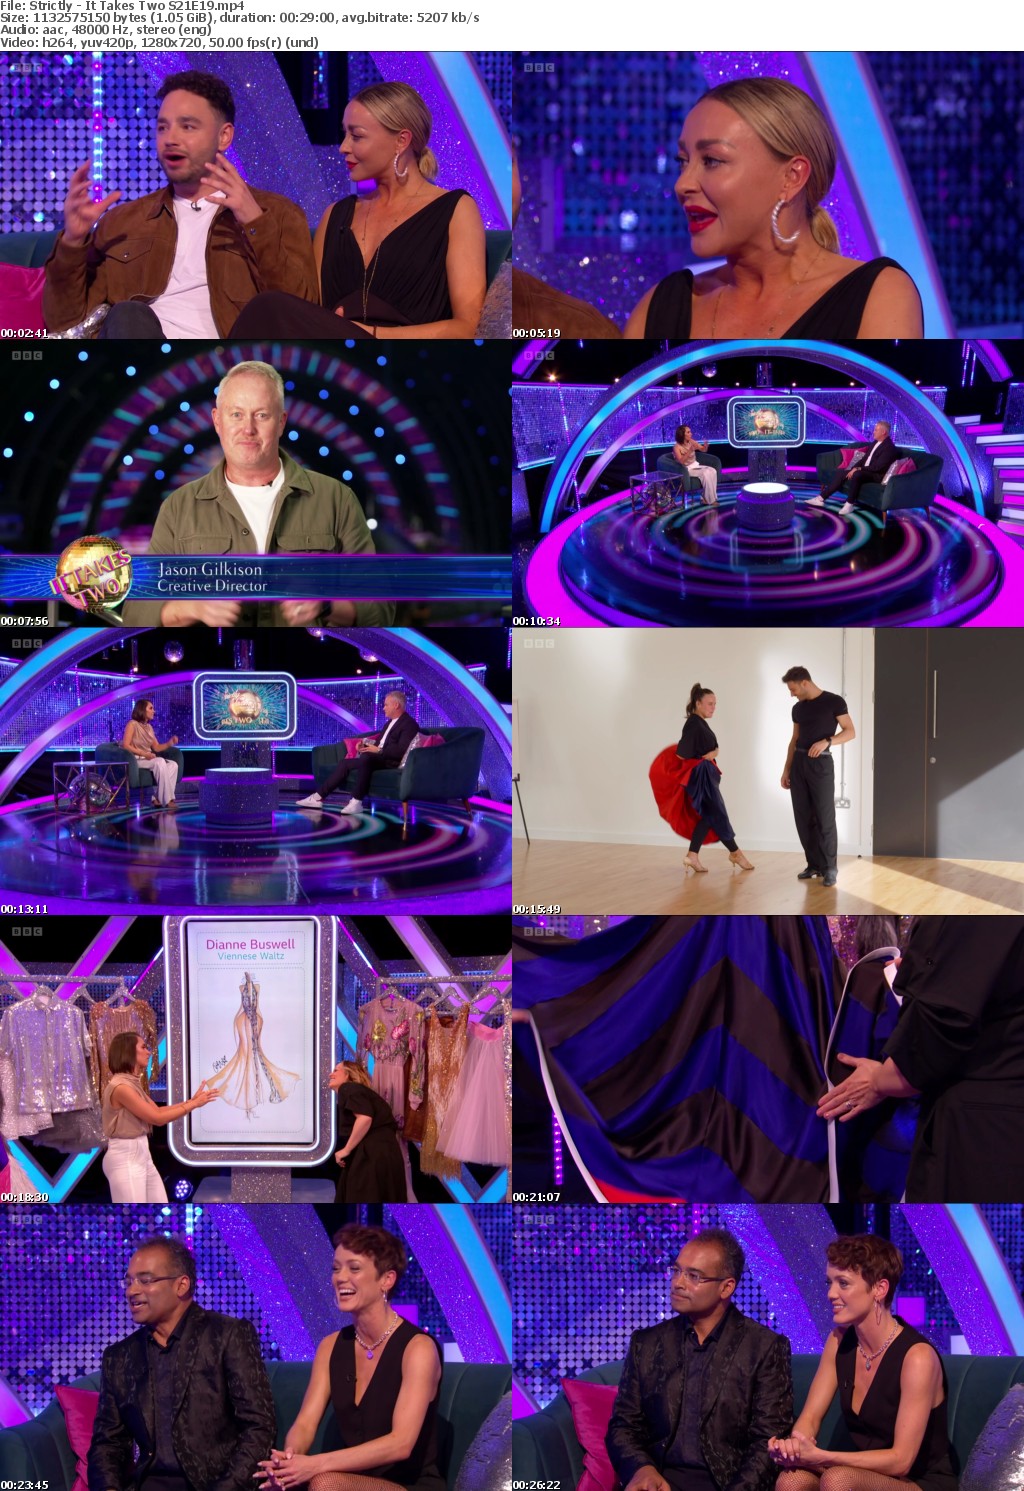 Strictly - It Takes Two S21E19 (1280x720p HD, 50fps, soft Eng subs)